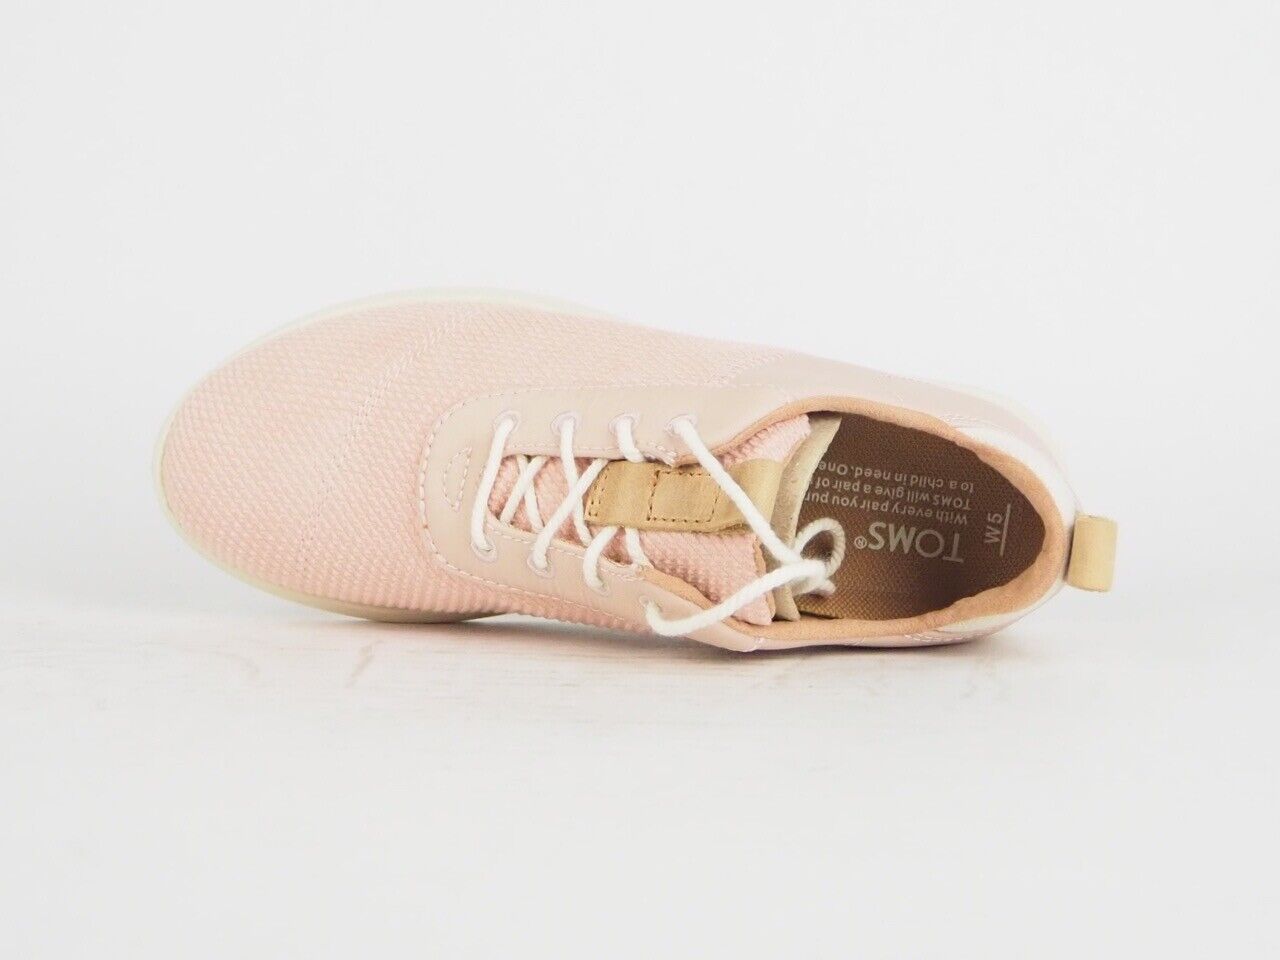 Womens Toms Cabrillo Rose Textile Lace Up Out Door Ladies Walking Trainers - London Top Style